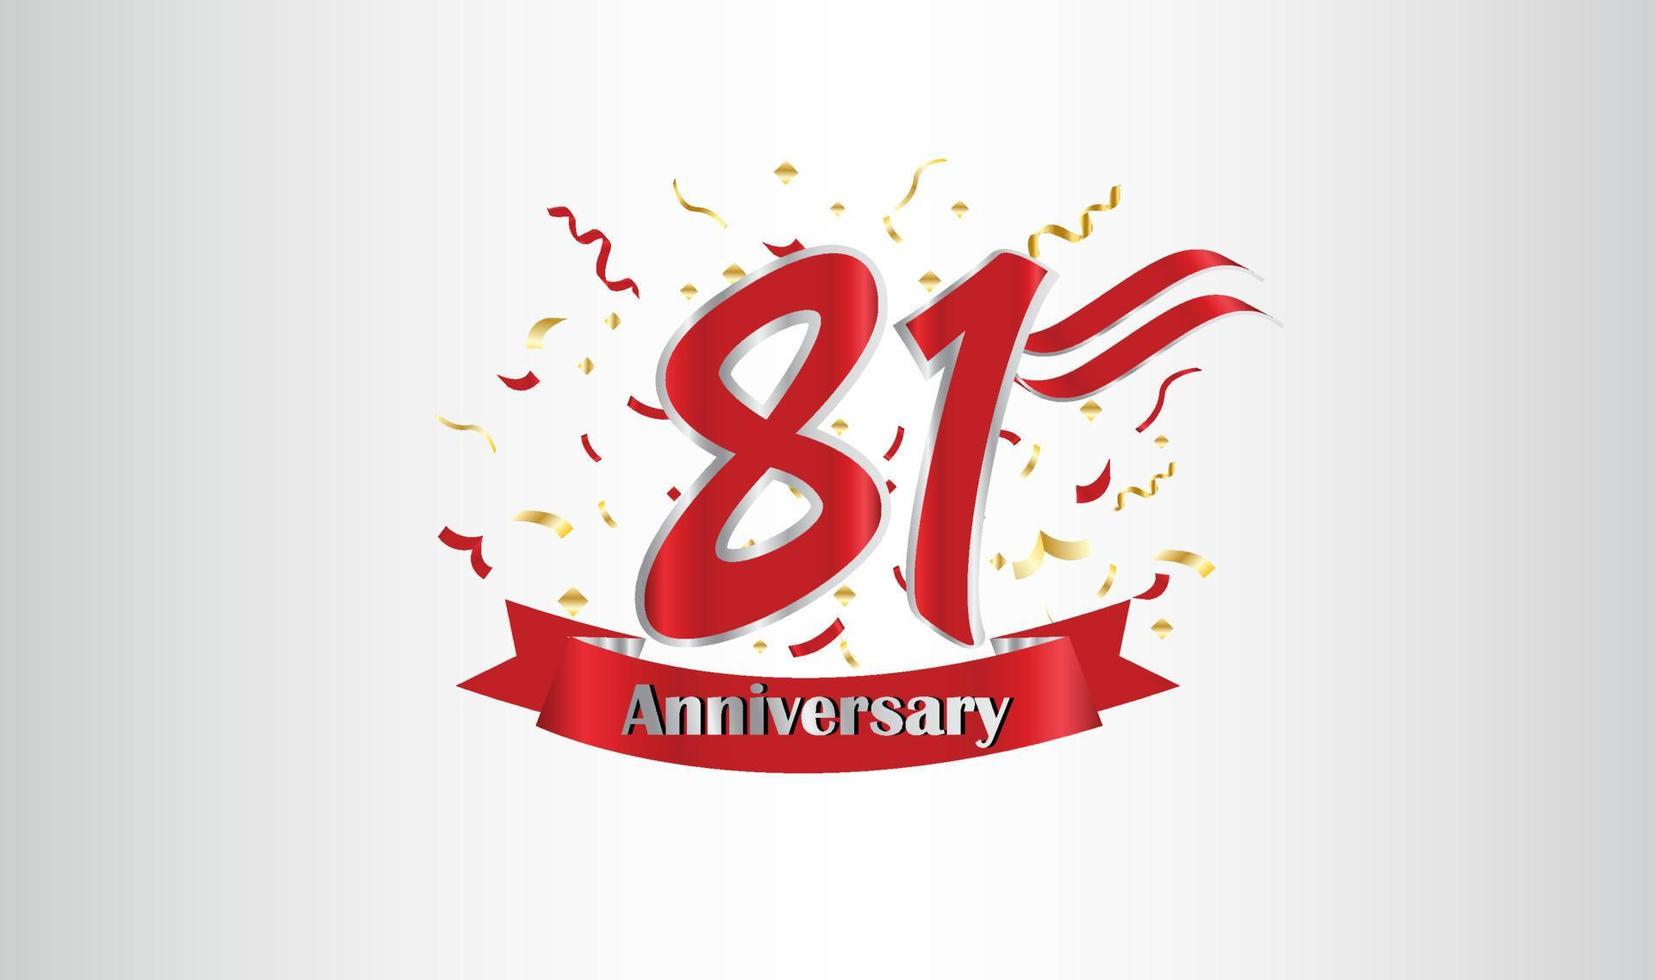 Anniversary celebration background. with the 81st number in gold and with the words golden anniversary celebration. vector